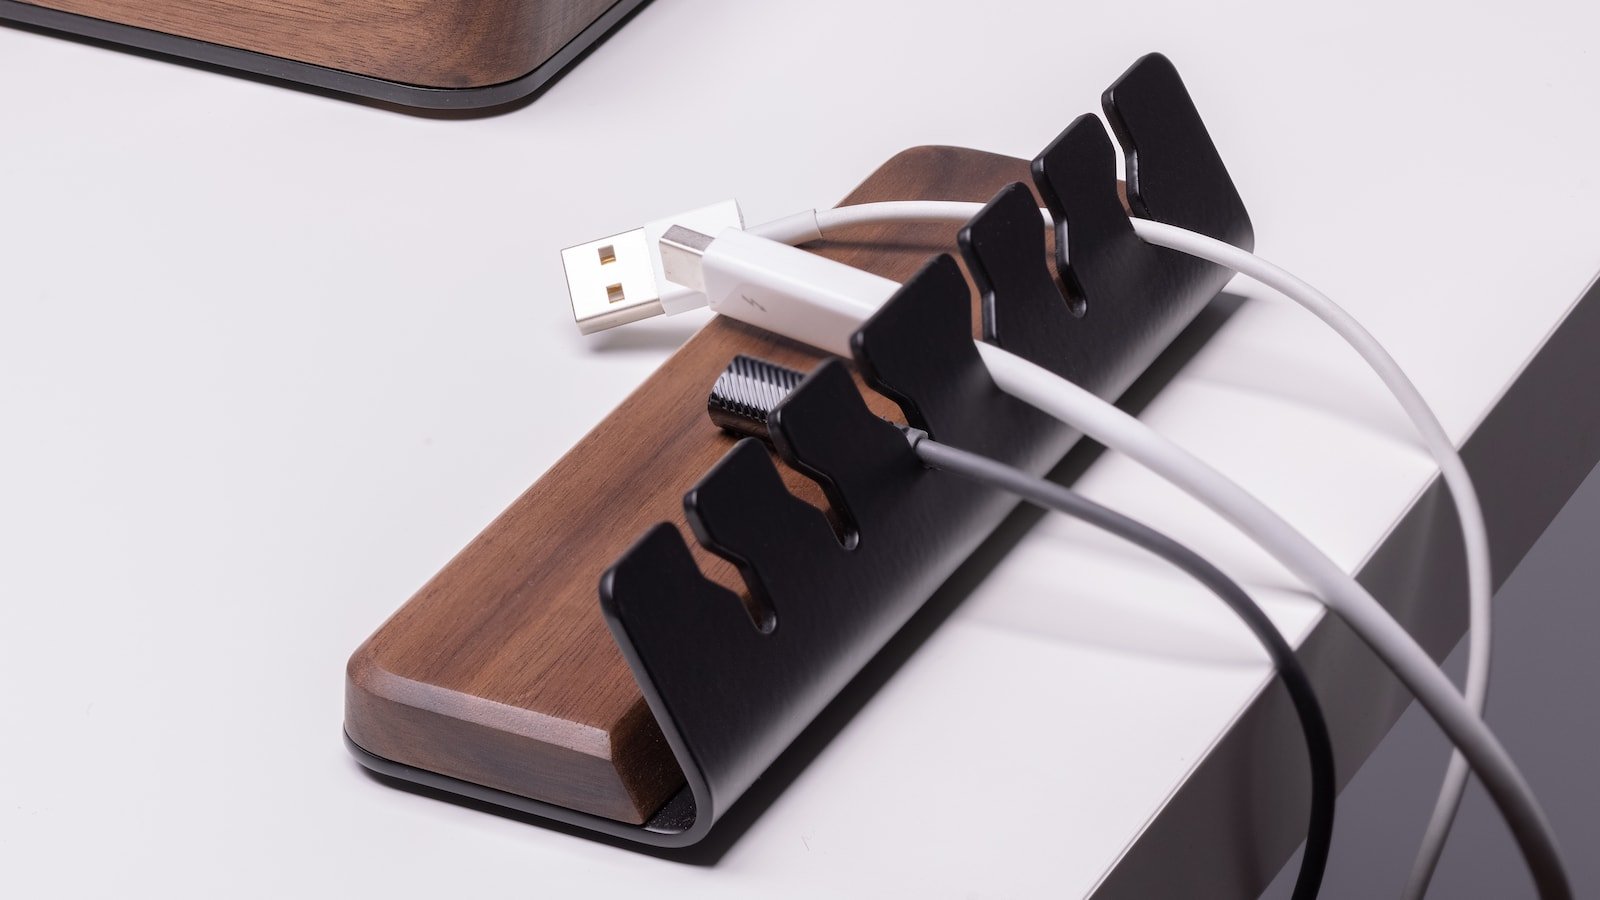 Batelier Handicraft Wood Cable Organizer has a handmade walnut base and holds 6 cords